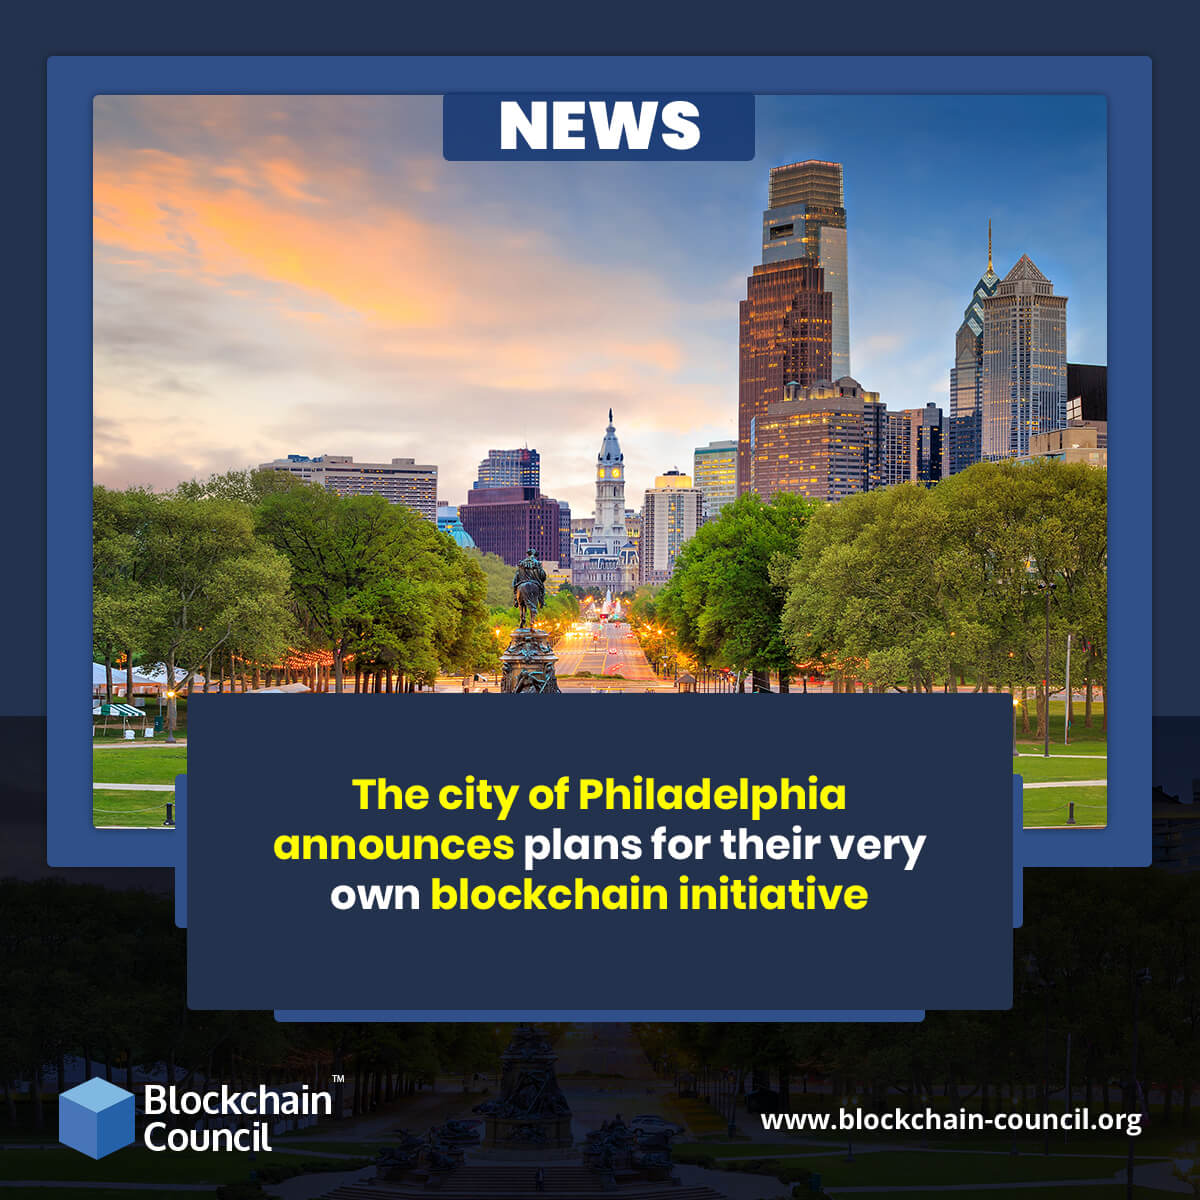 The city of Philadelphia announces plans for their very own blockchain initiative